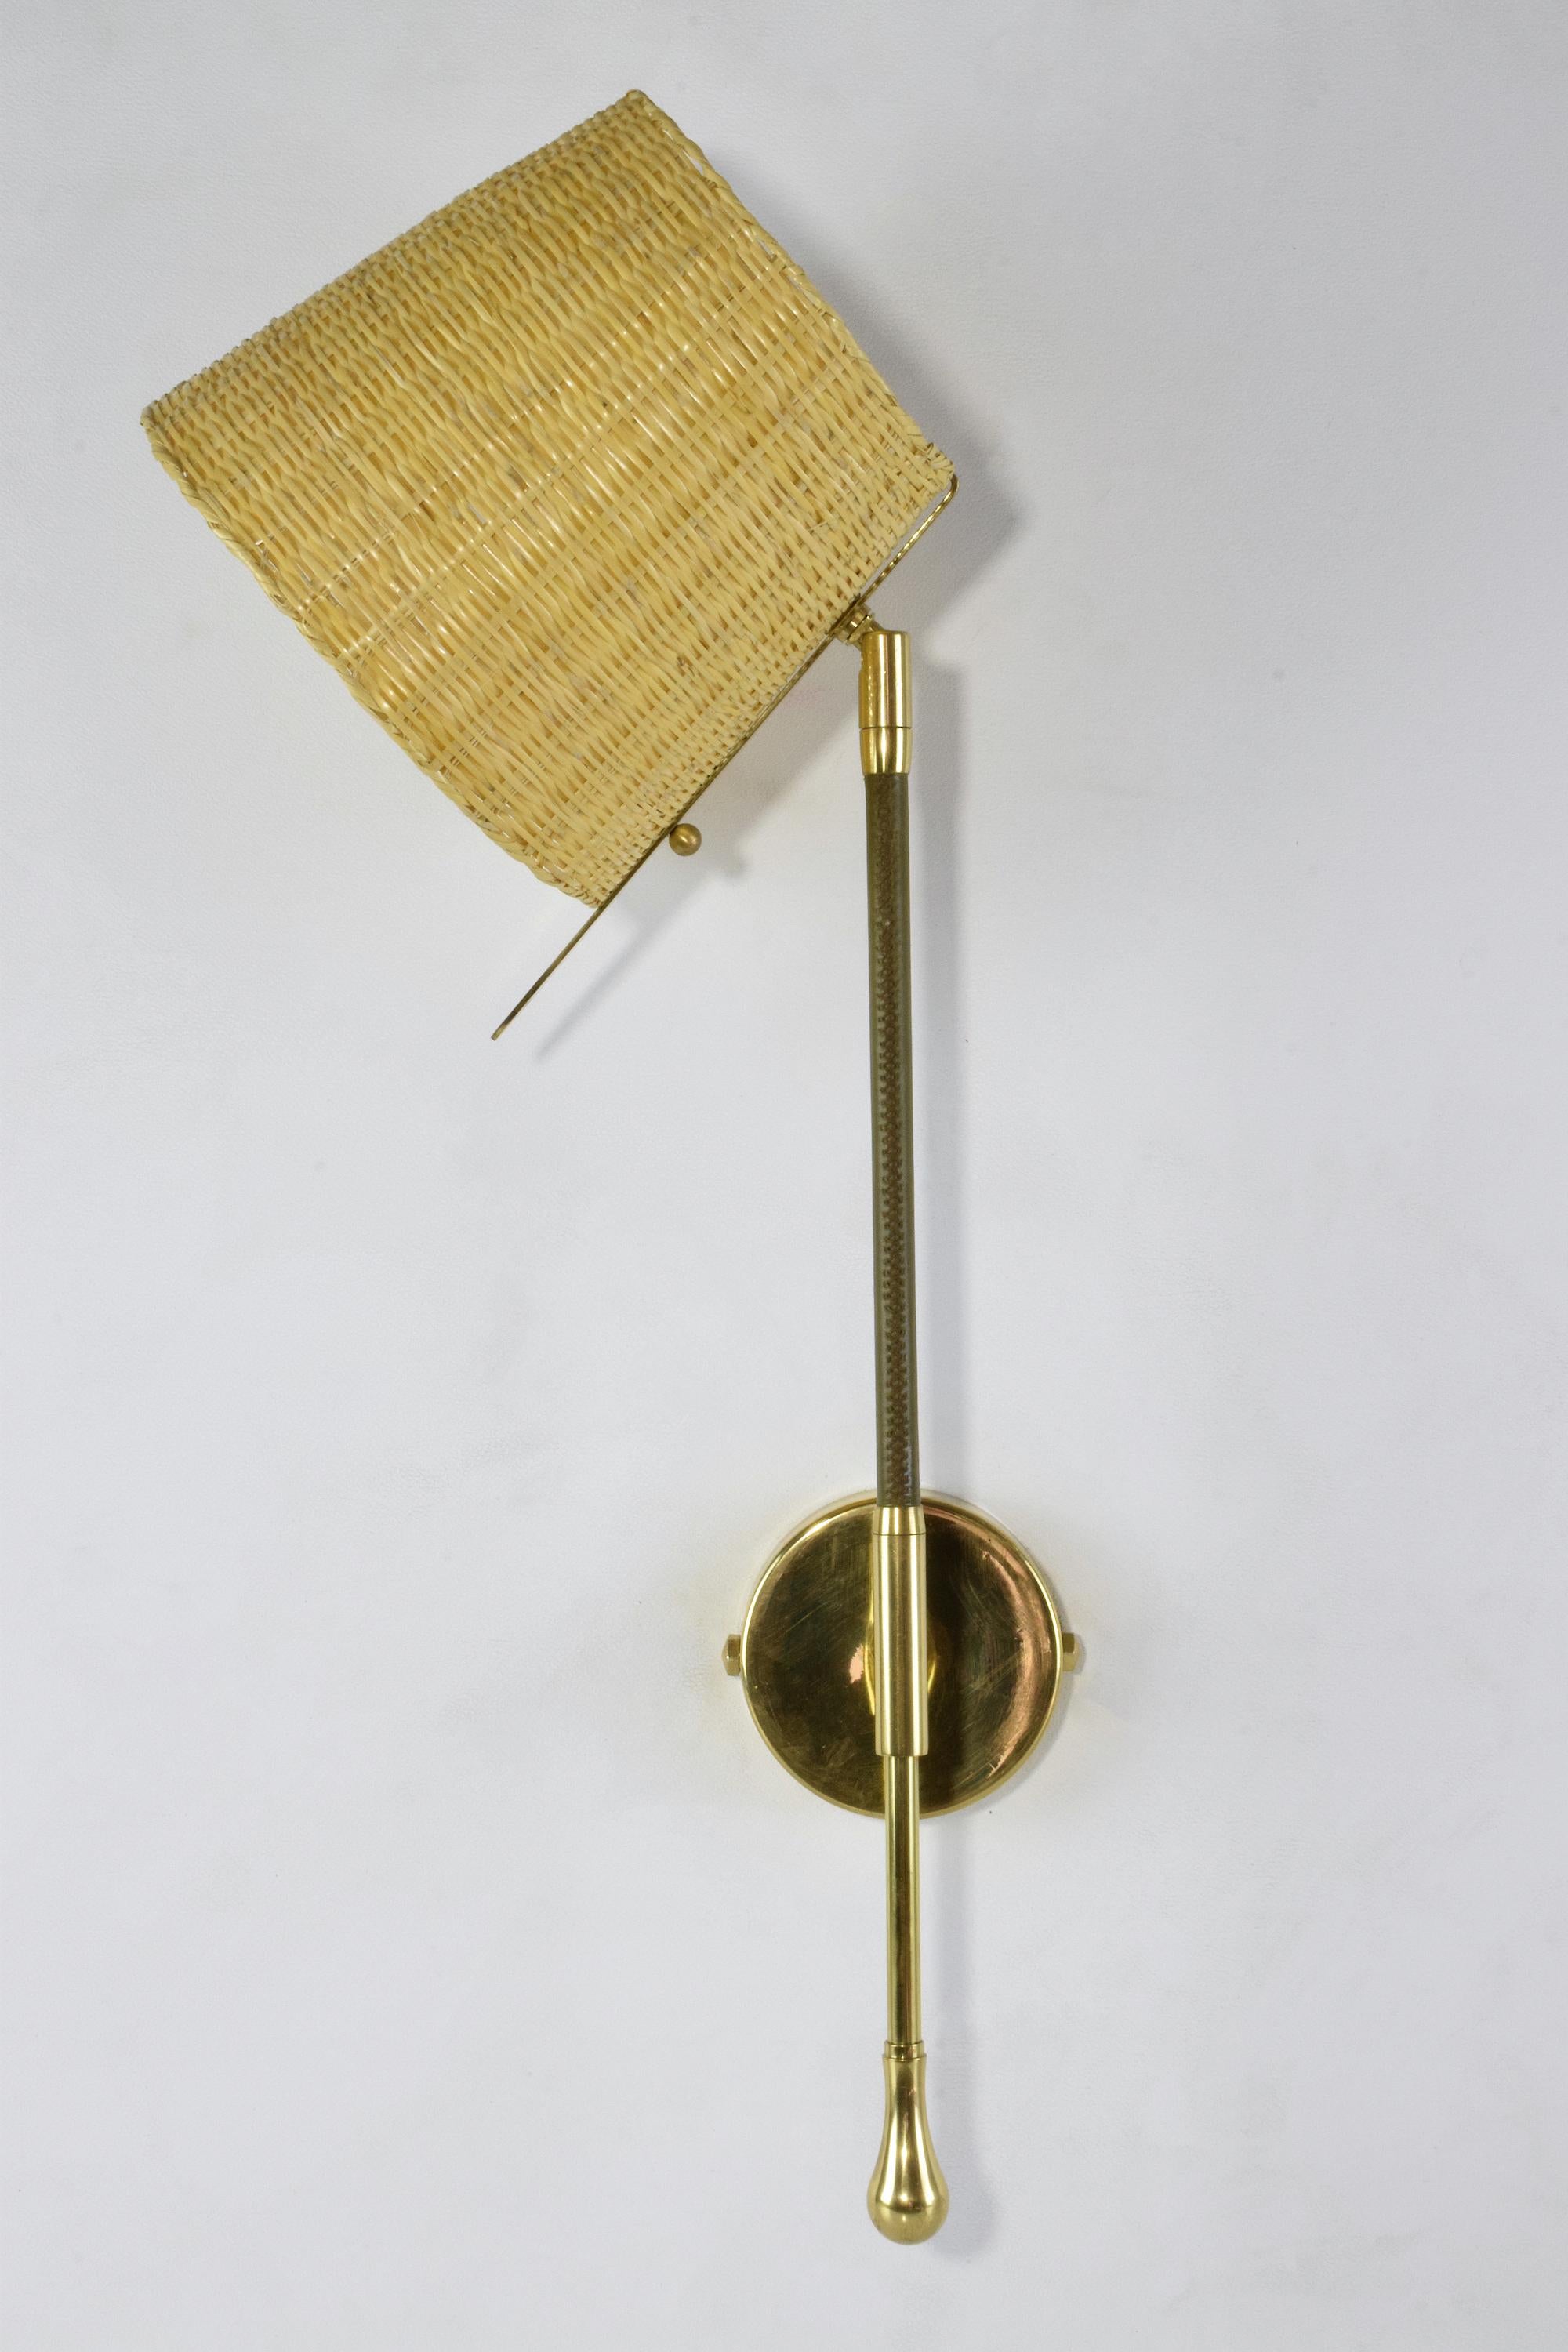 Ancora-W2 Contemporary Brass and Wicker Wall Light, Flow Collection In New Condition For Sale In Paris, FR